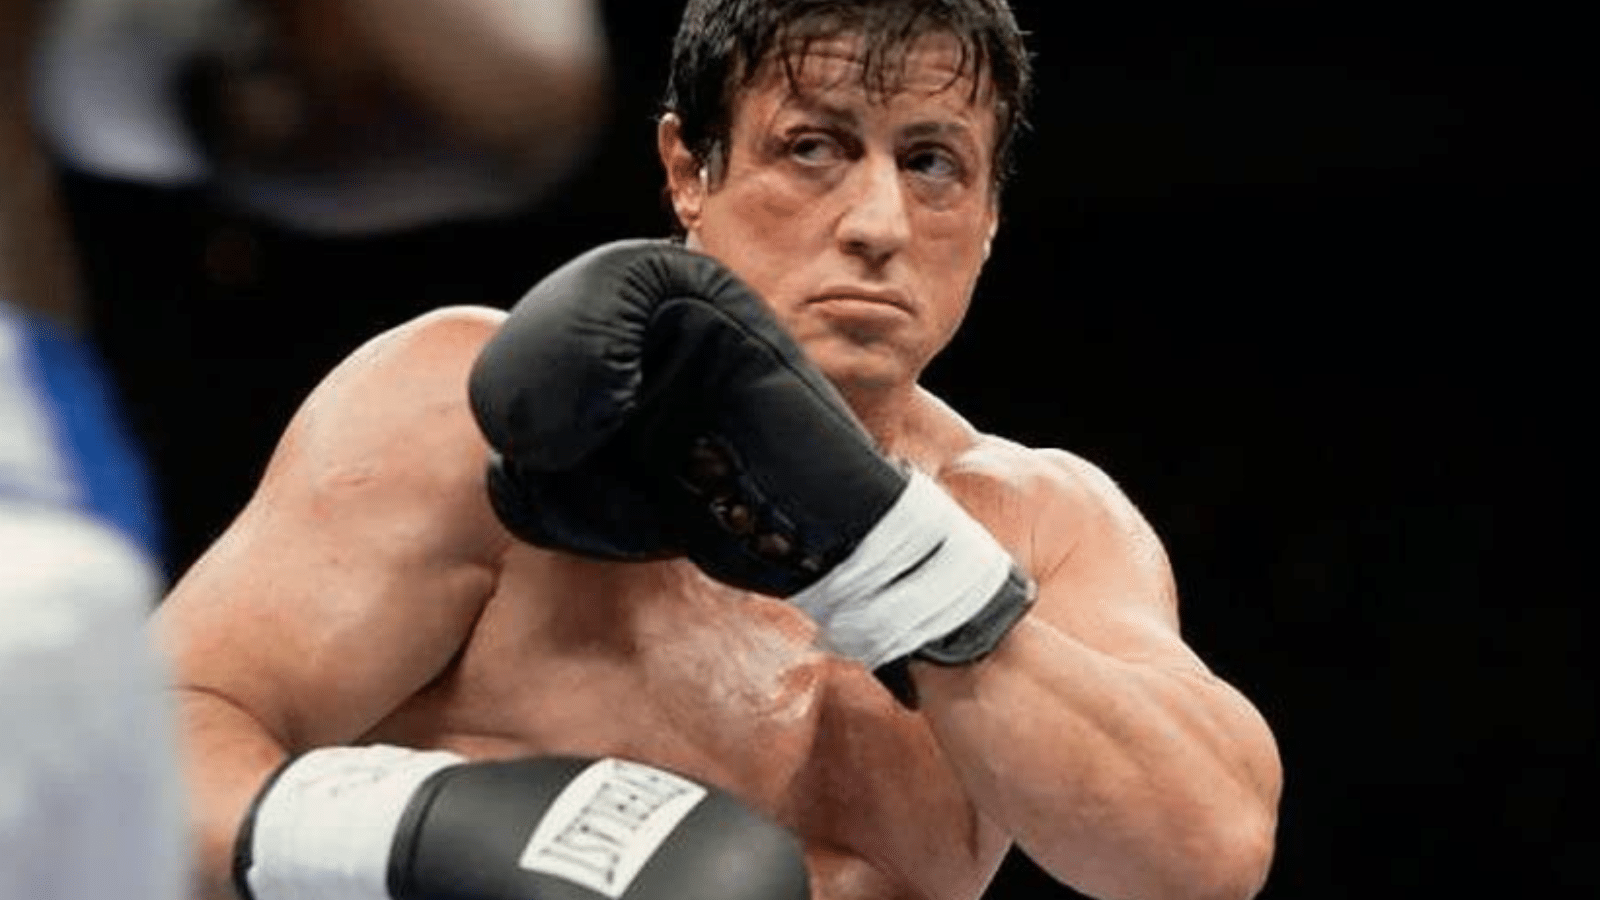 Sylvester Stallone’s 25 Best Movies Ranked